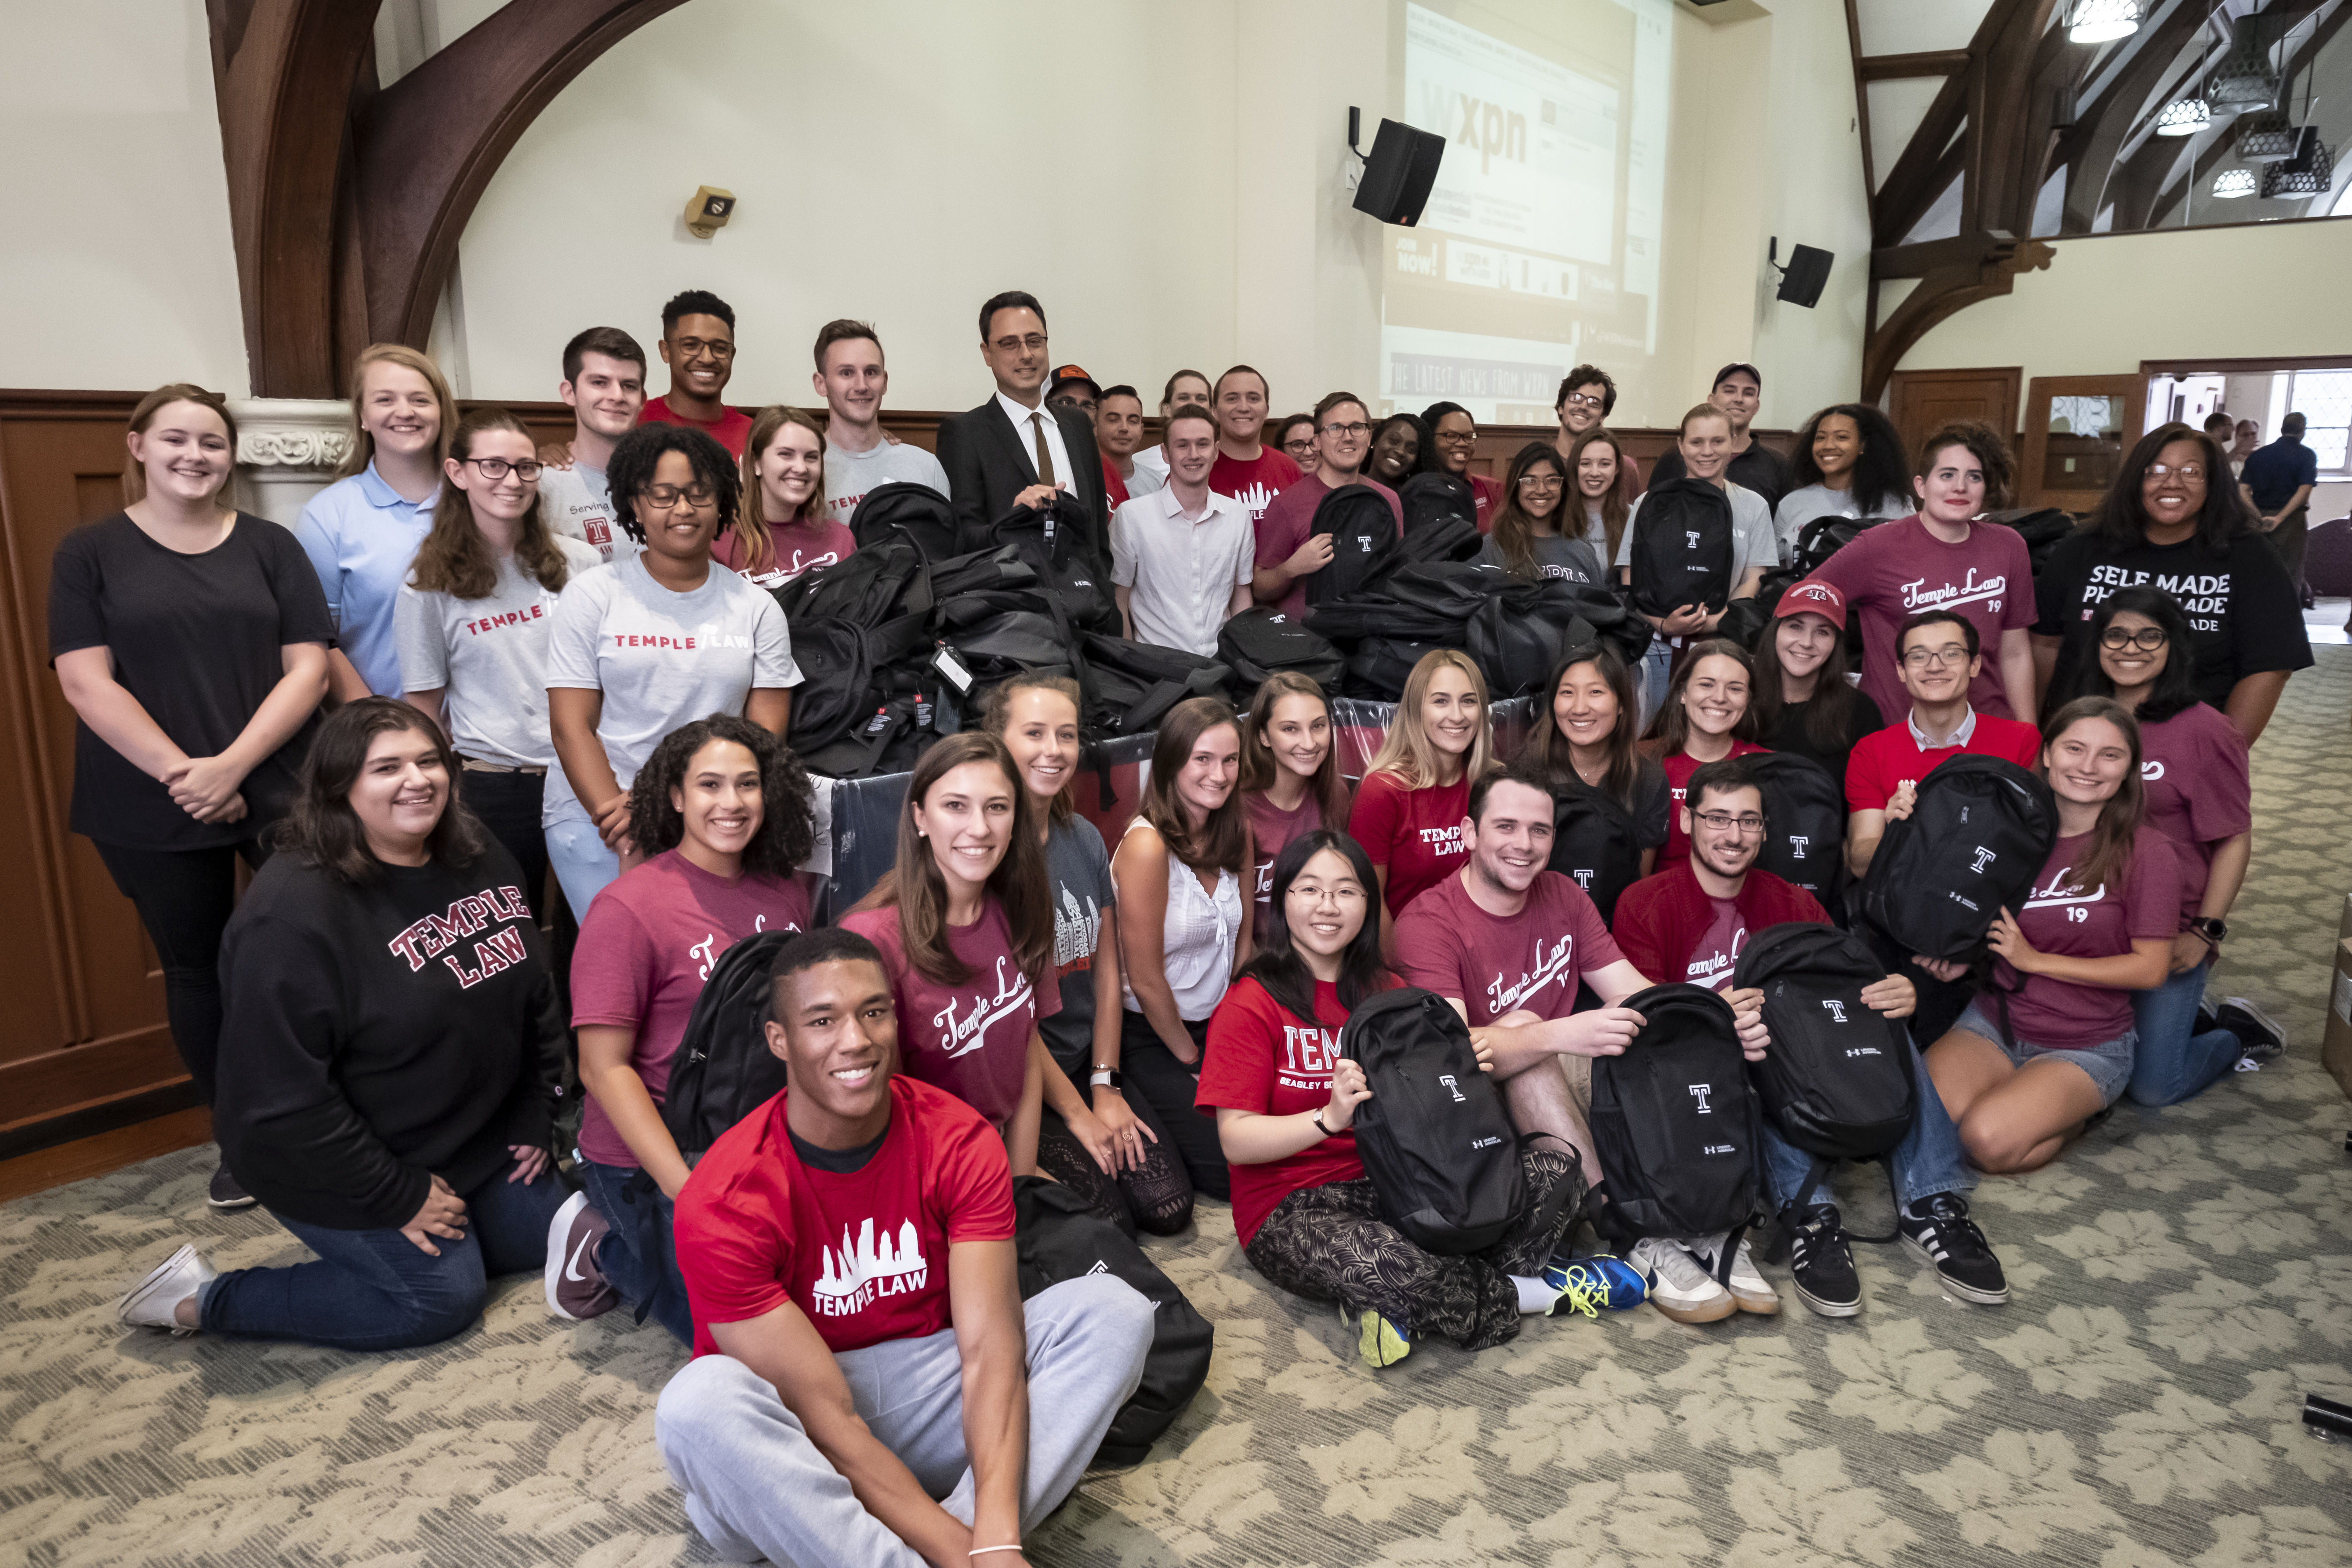 Temple Law students packed school supplies for children in Shusterman Hall as part of a community service project.